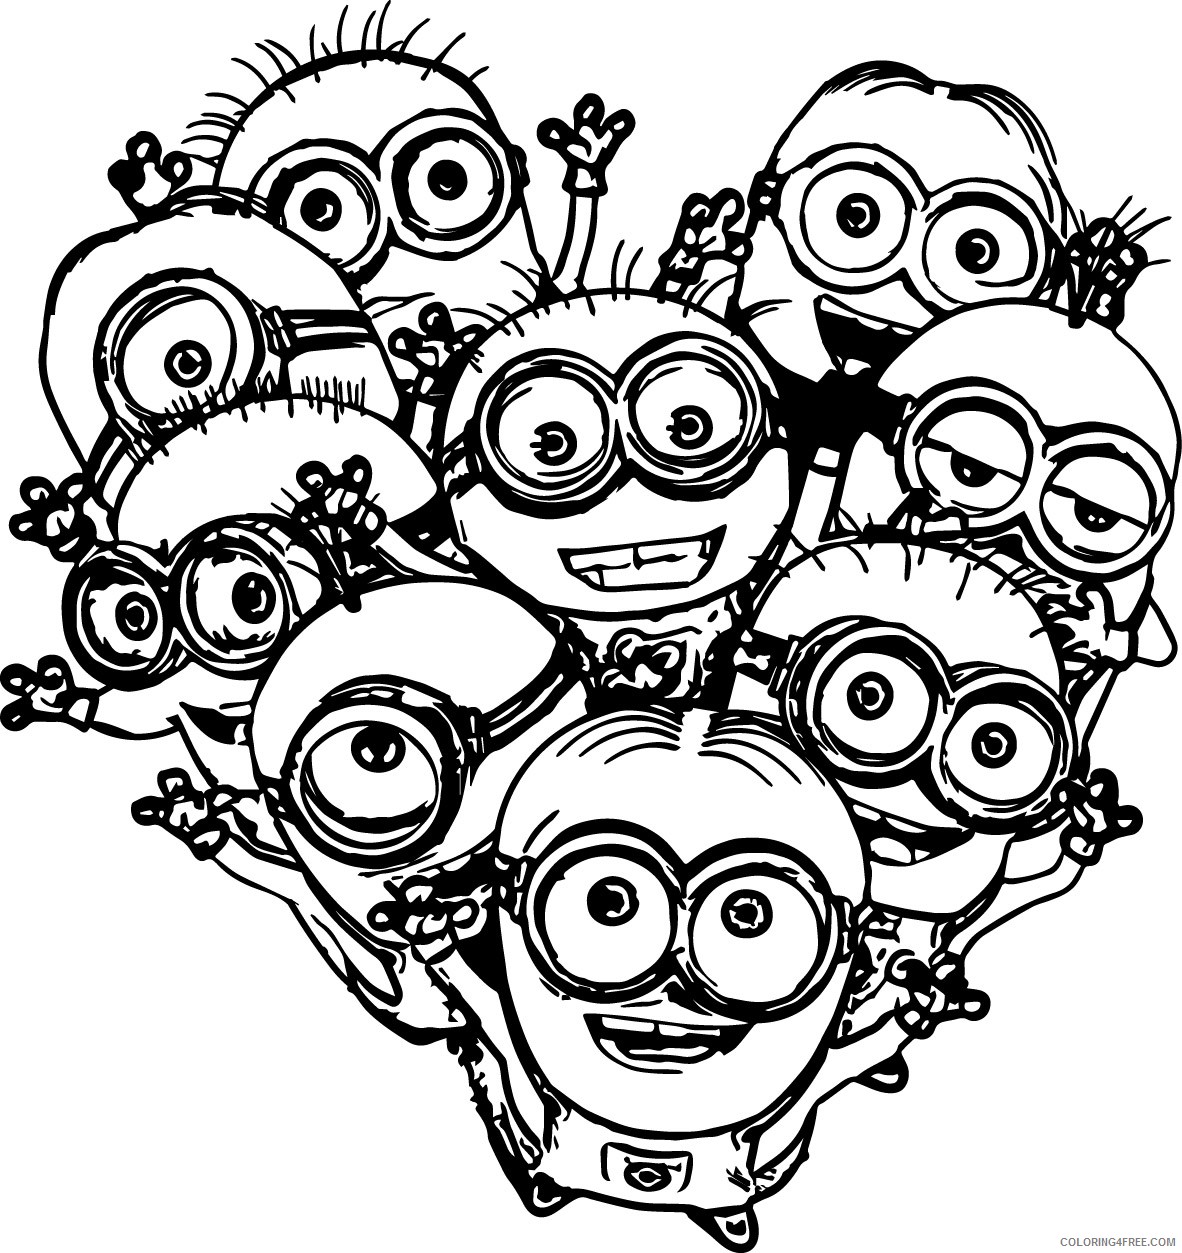 minions coloring pages free to print Coloring4free